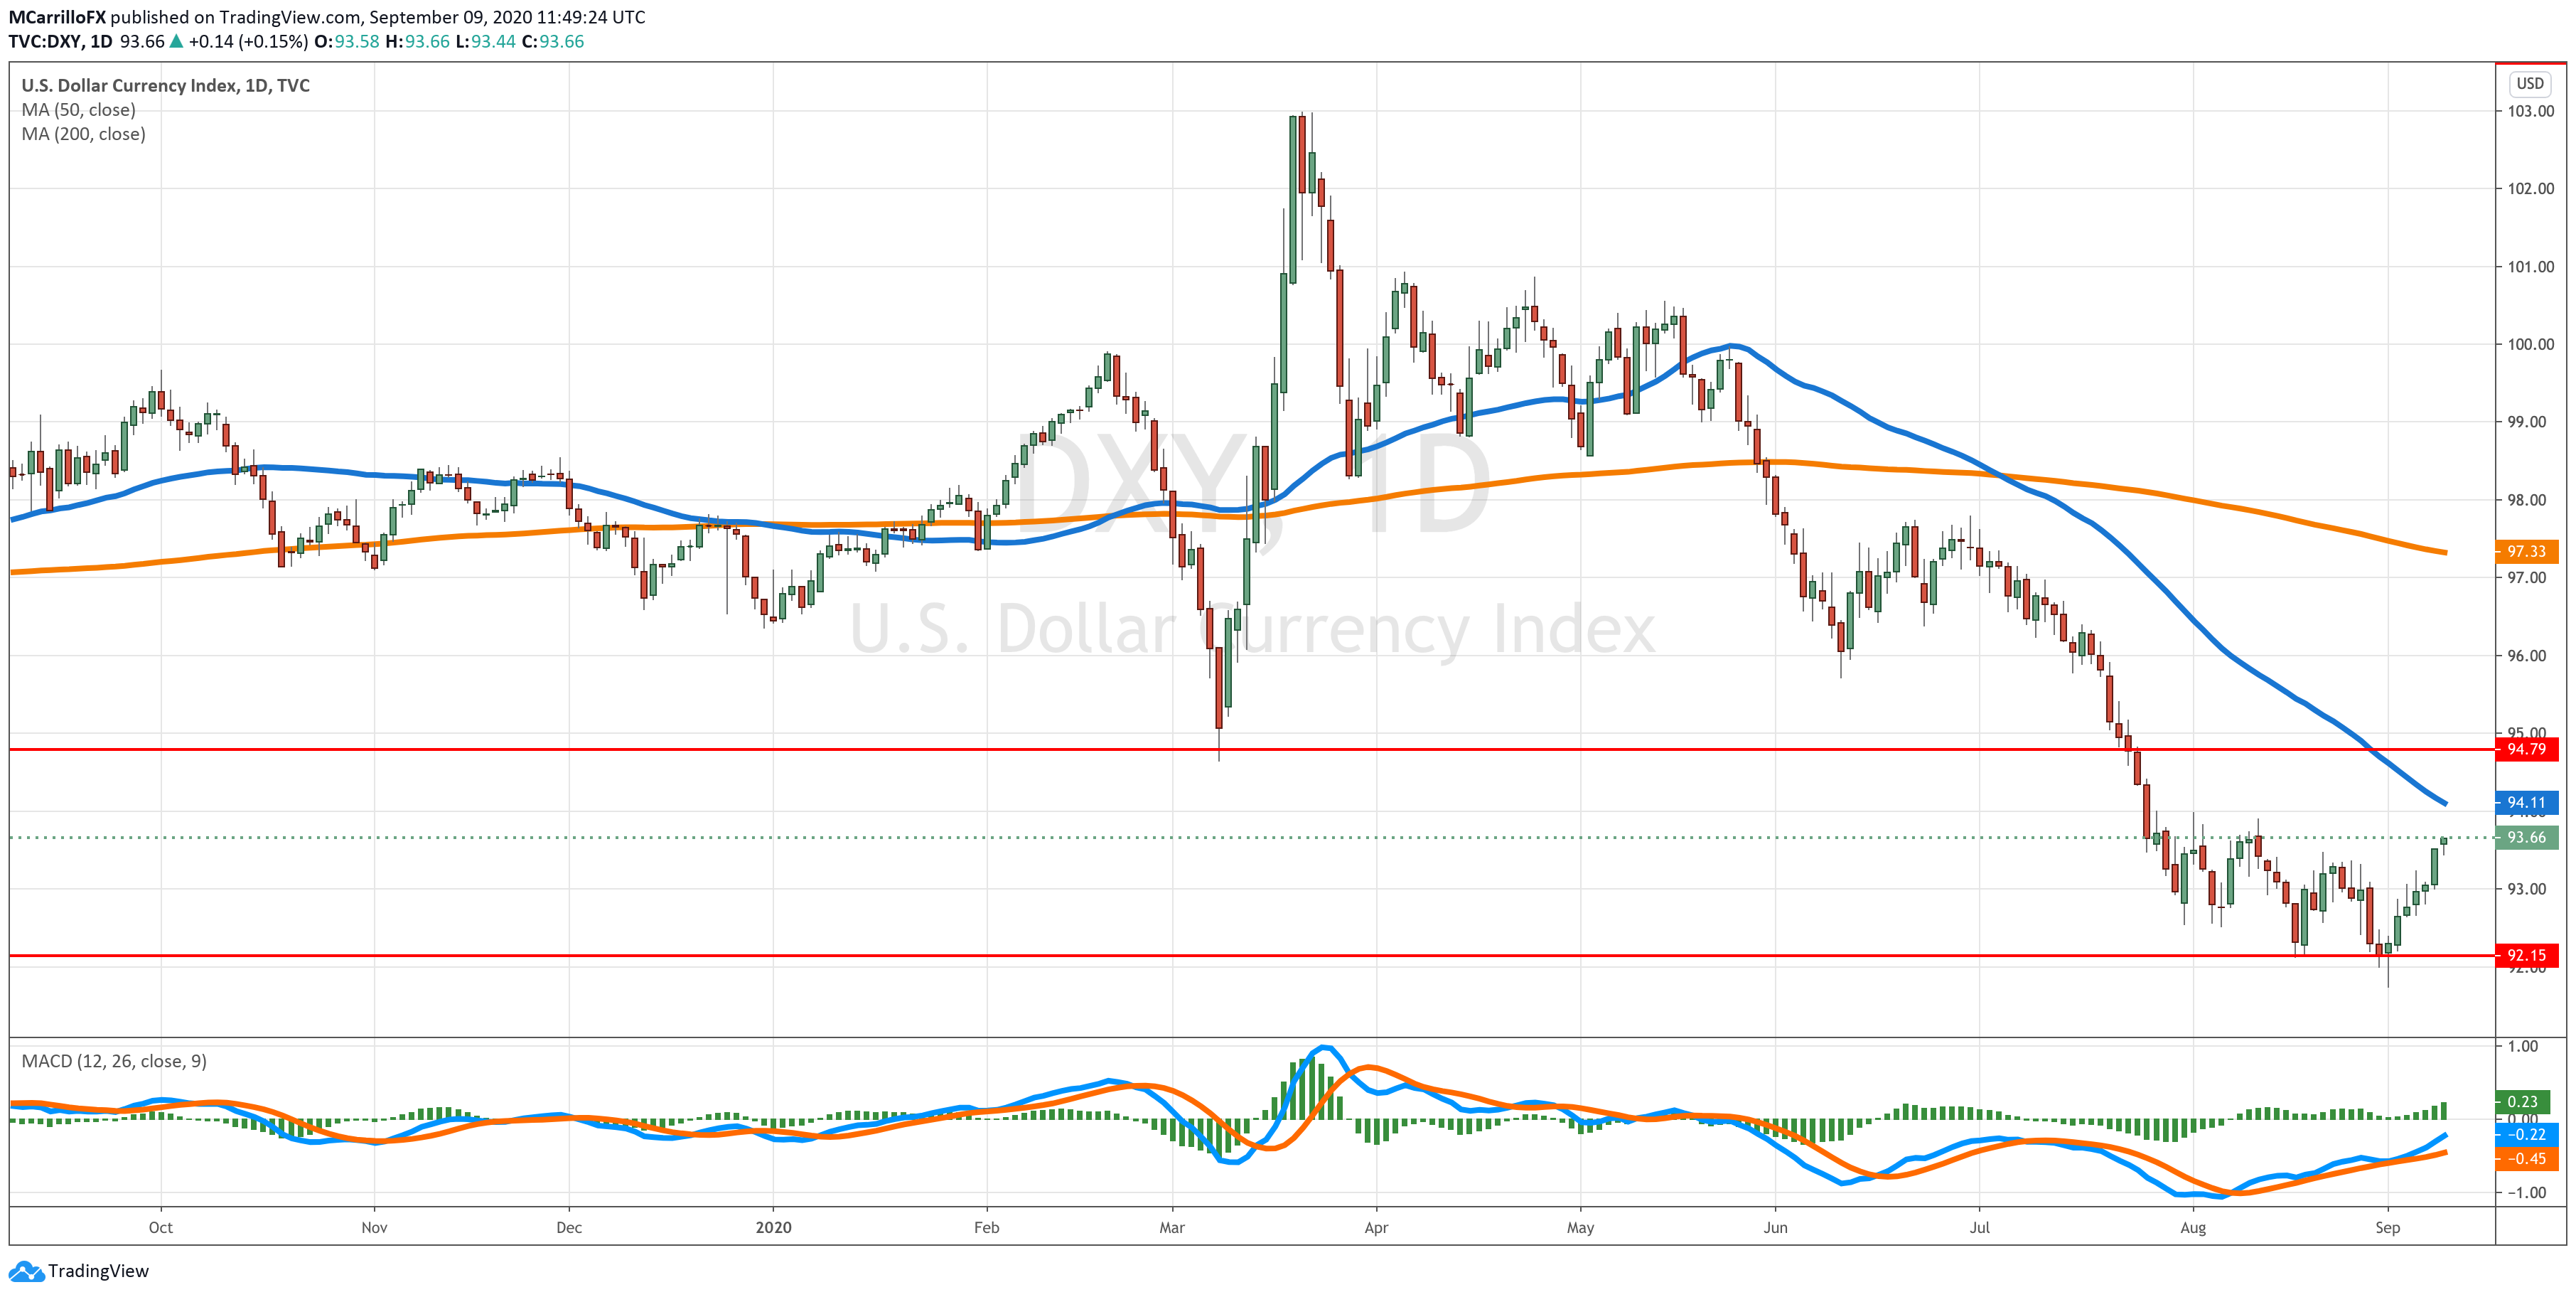 DXY chart diario sept 9